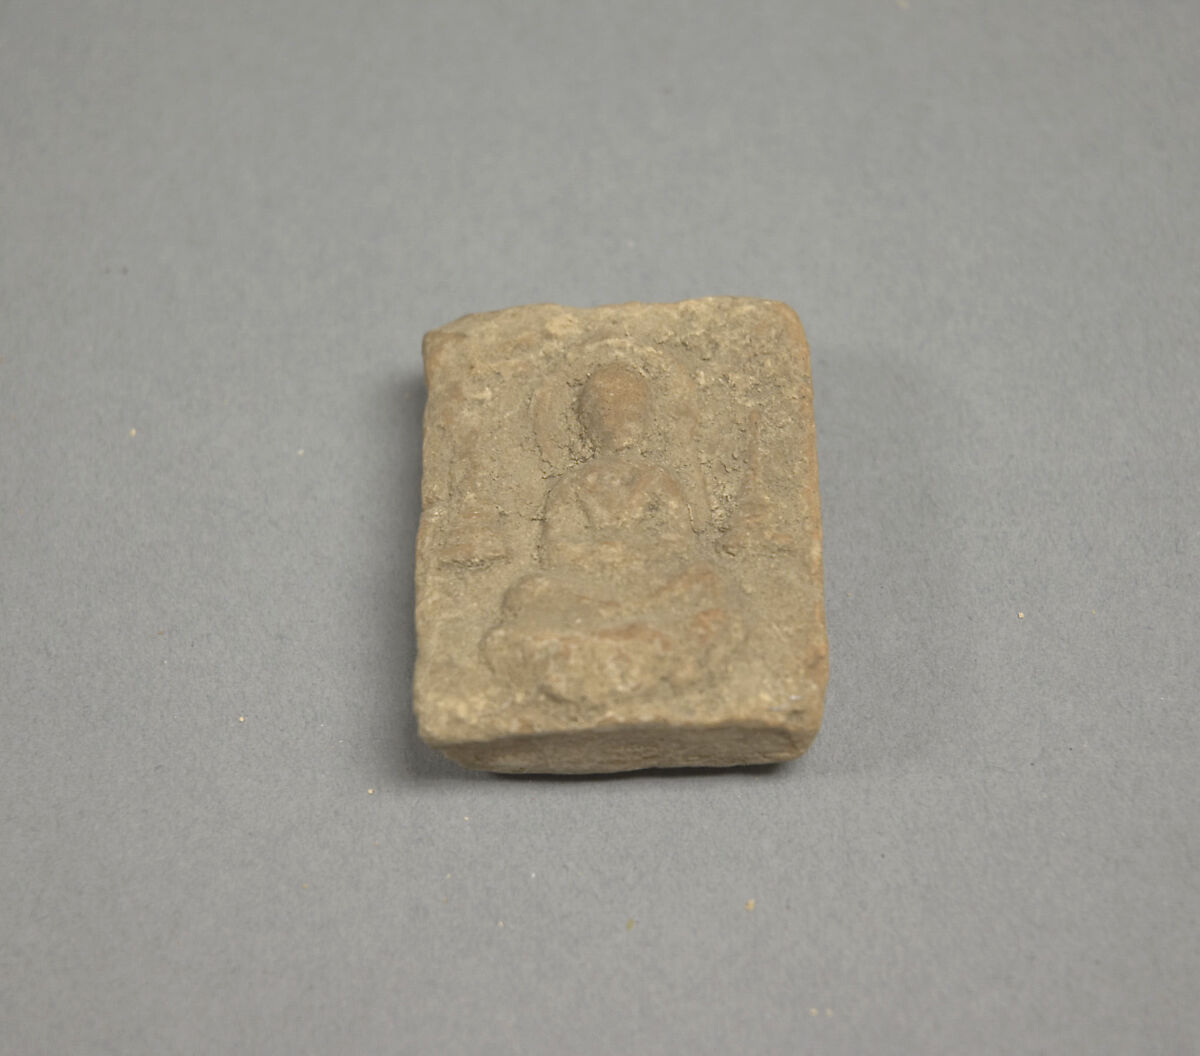 Votive Plaque with Seated Buddhas, Terracotta, Tibet 